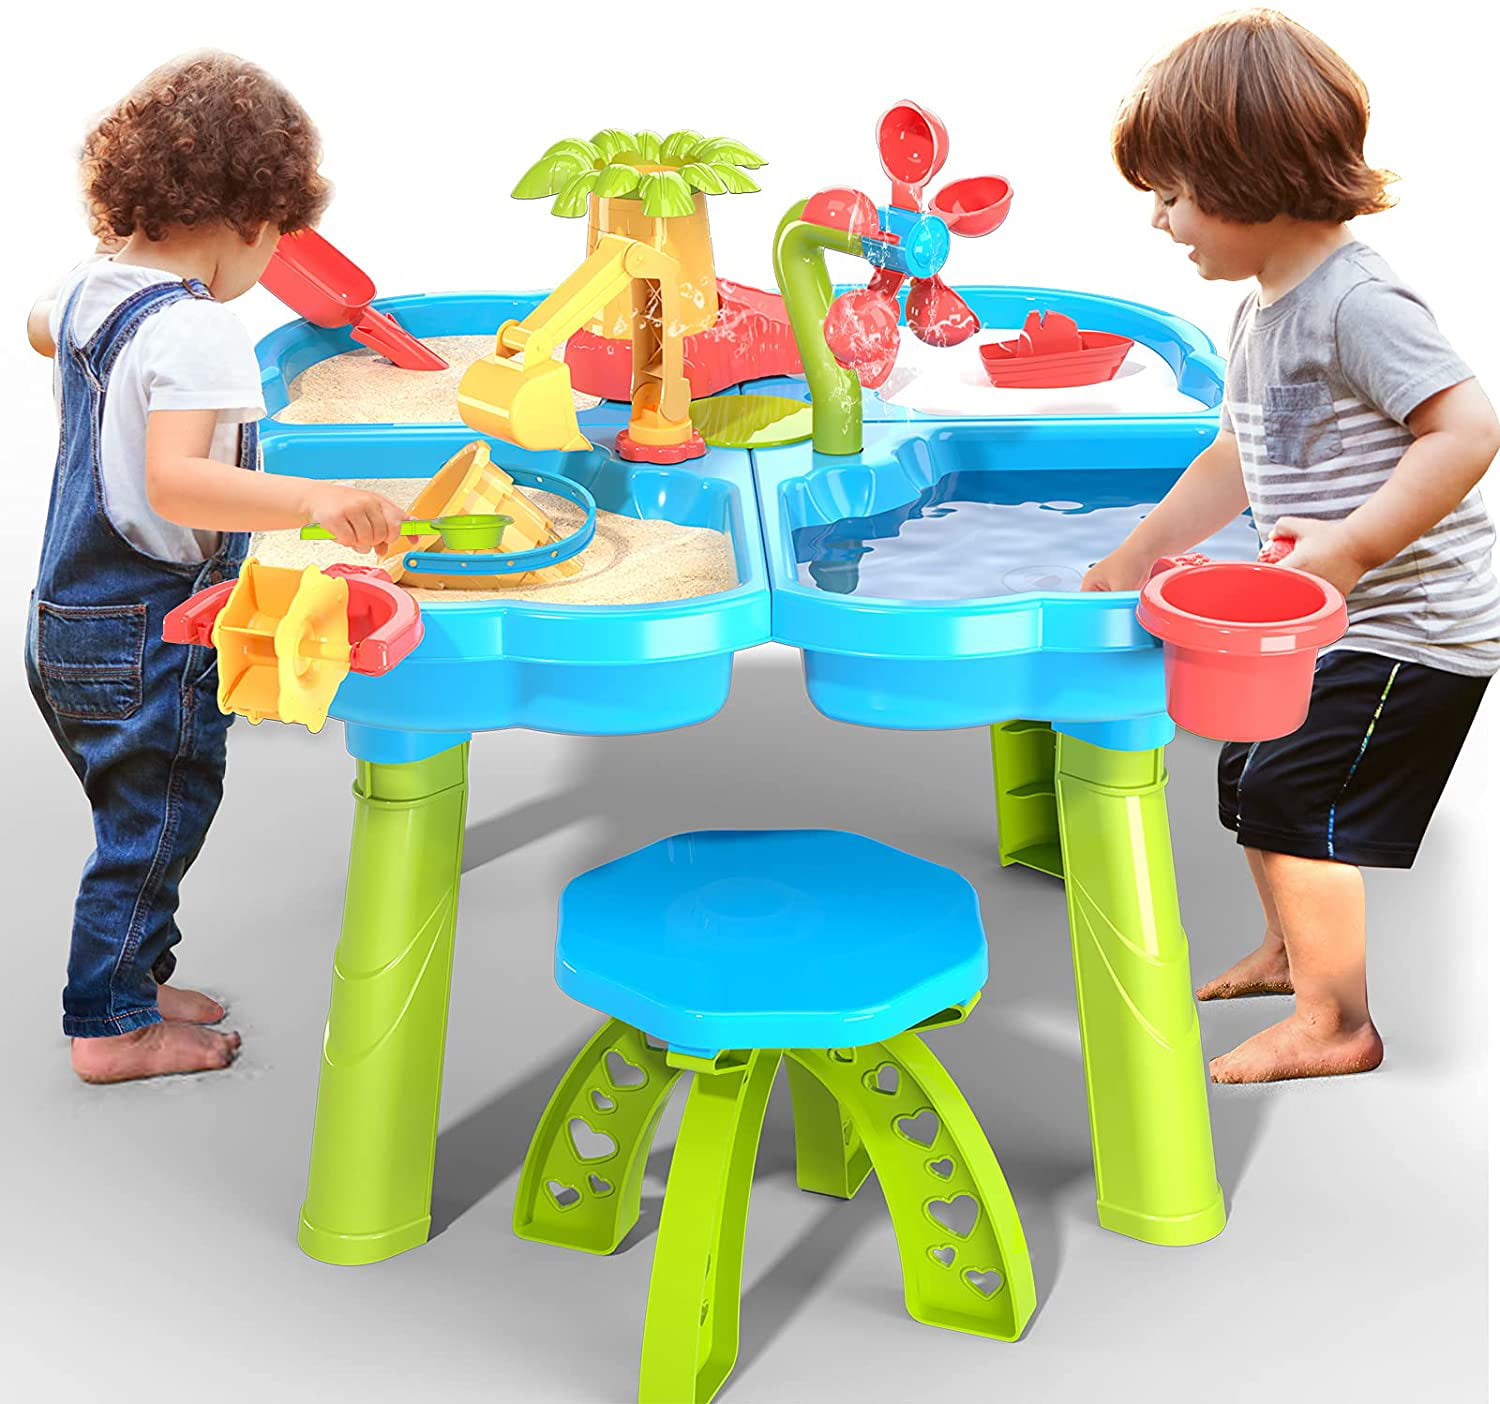 CHILDRENS SAND AND WATER TRAY 